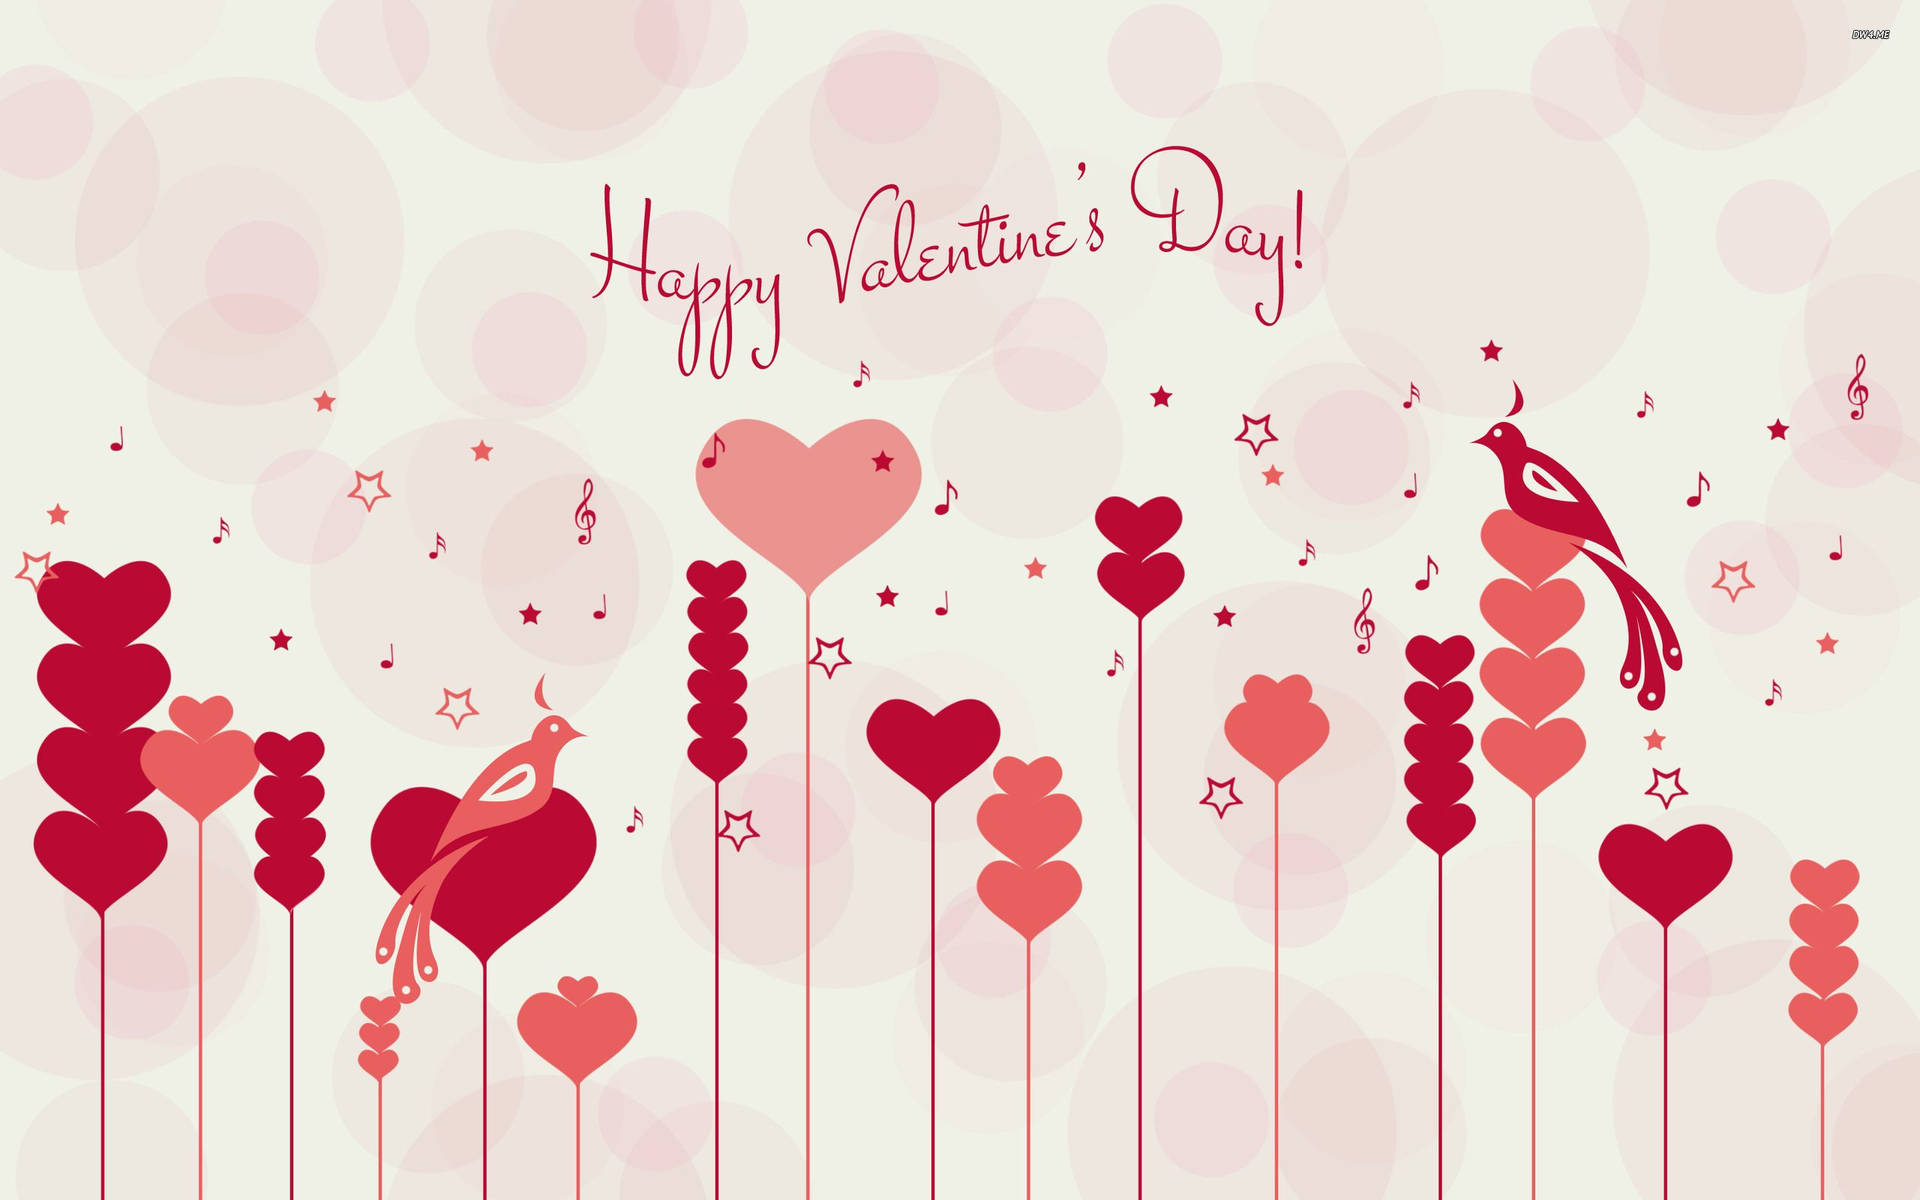 100+] Cute Valentines Day Wallpapers